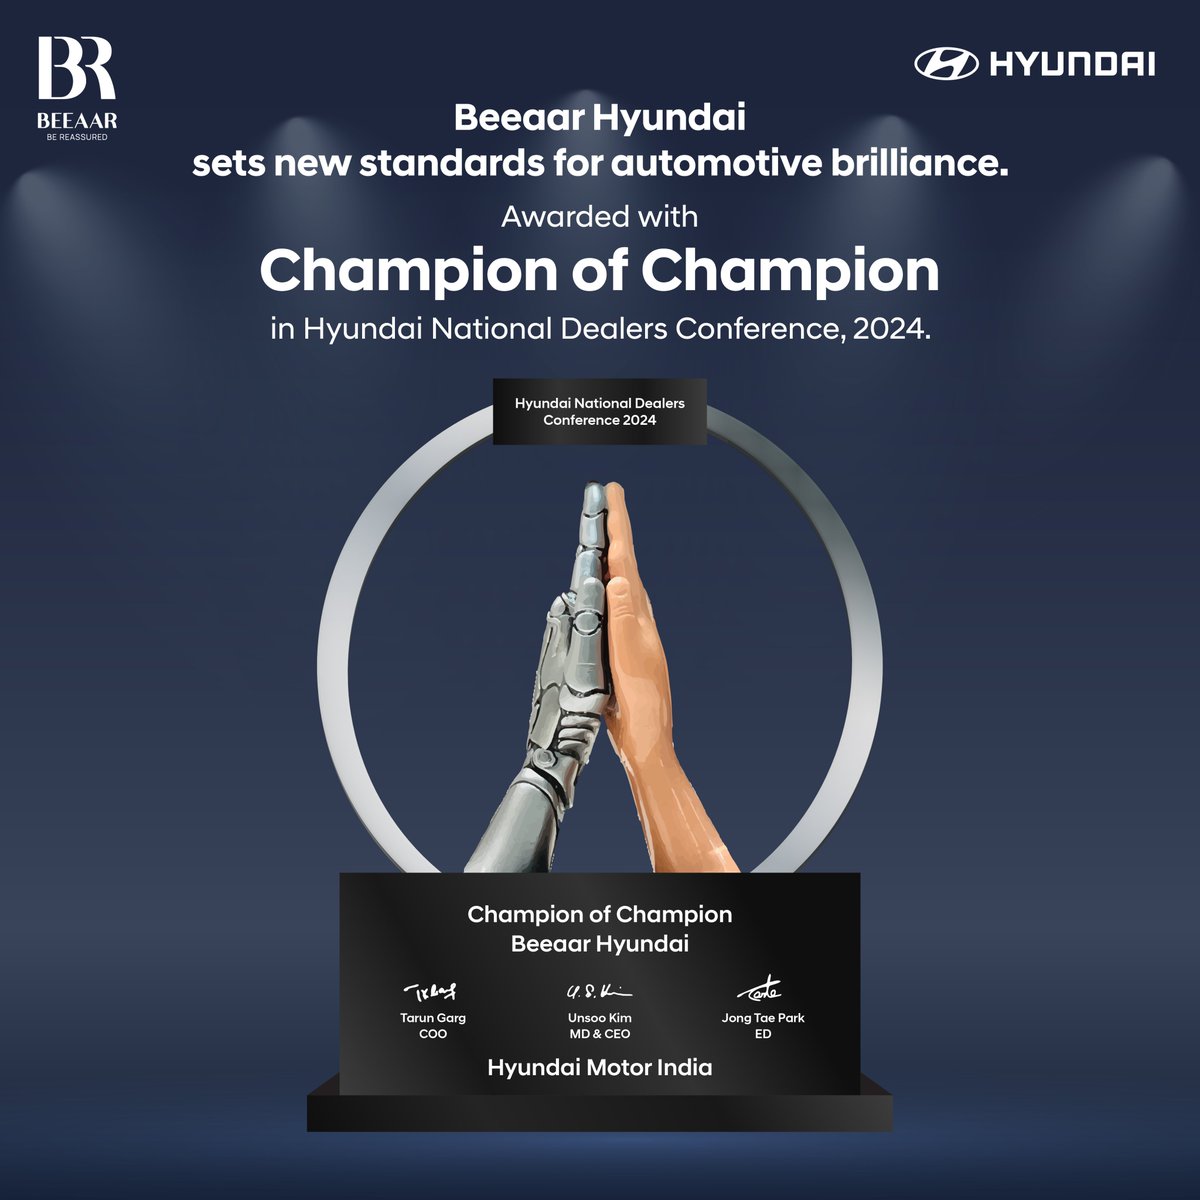 Beeaar Hyundai takes home the prestigious title of Champion of Champion for 2024.  The National title is awarded to Beeaar Hyundai for exemplary dealership performance & customer delight in vehicle sales and service.

#Hyundai #HyundaiExcellence #BeeaarHyundai #Award #BeeaarGroup